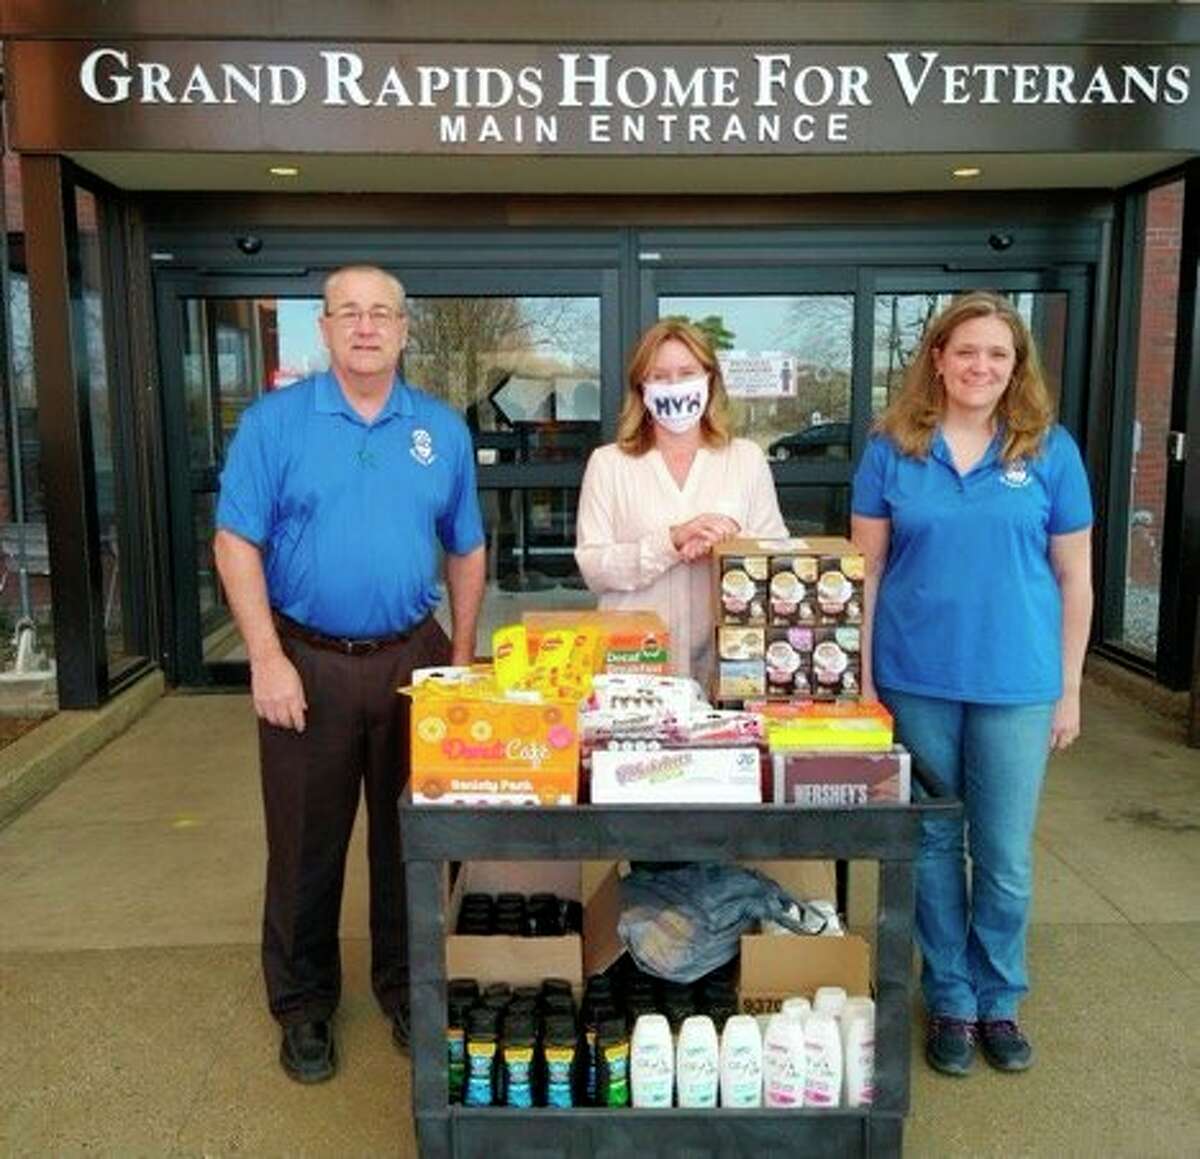 The Big Rapids Elks Lodge 974 made a donation of needed items to the Grand Rapids Home for Veterans. The items included batteries for the Veterans electronic devices, chap stick, K-cups, hygiene products, and candy bars. The Veterans Home stated that "these are the most requested items from the Veterans that they cannot get without these types of donations". One of the mottos of the Elks is, "As long as there are Veterans the Elks will never forget." Pictured from left to right is Elk's member Tom Stellard, Veterans Home Coordinator, Tiffany Carr and Elk's Member Stephanie Stellard. (Submitted photo)